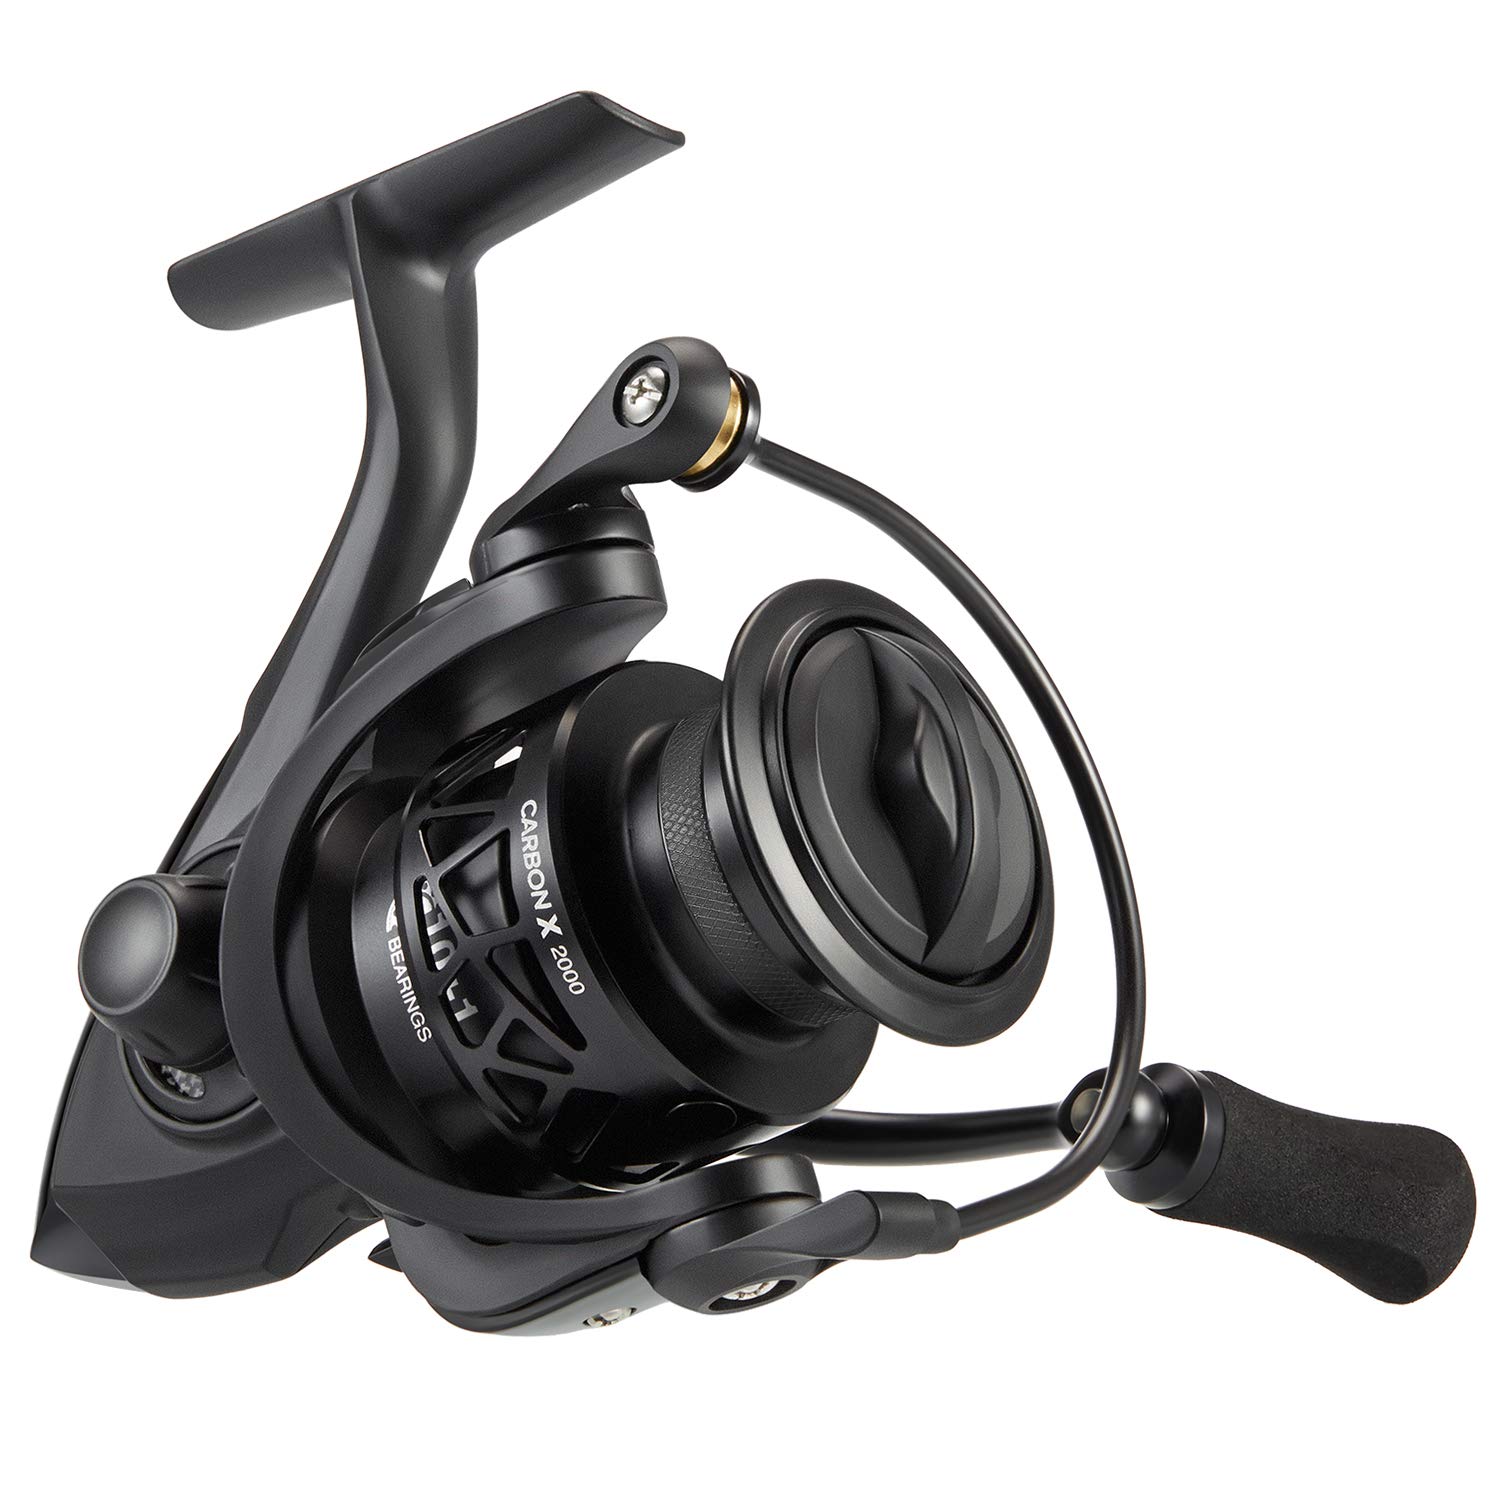 Piscifun Carbon X Spinning Reels - Light to 5.7oz, 5.2:1-6.2:1